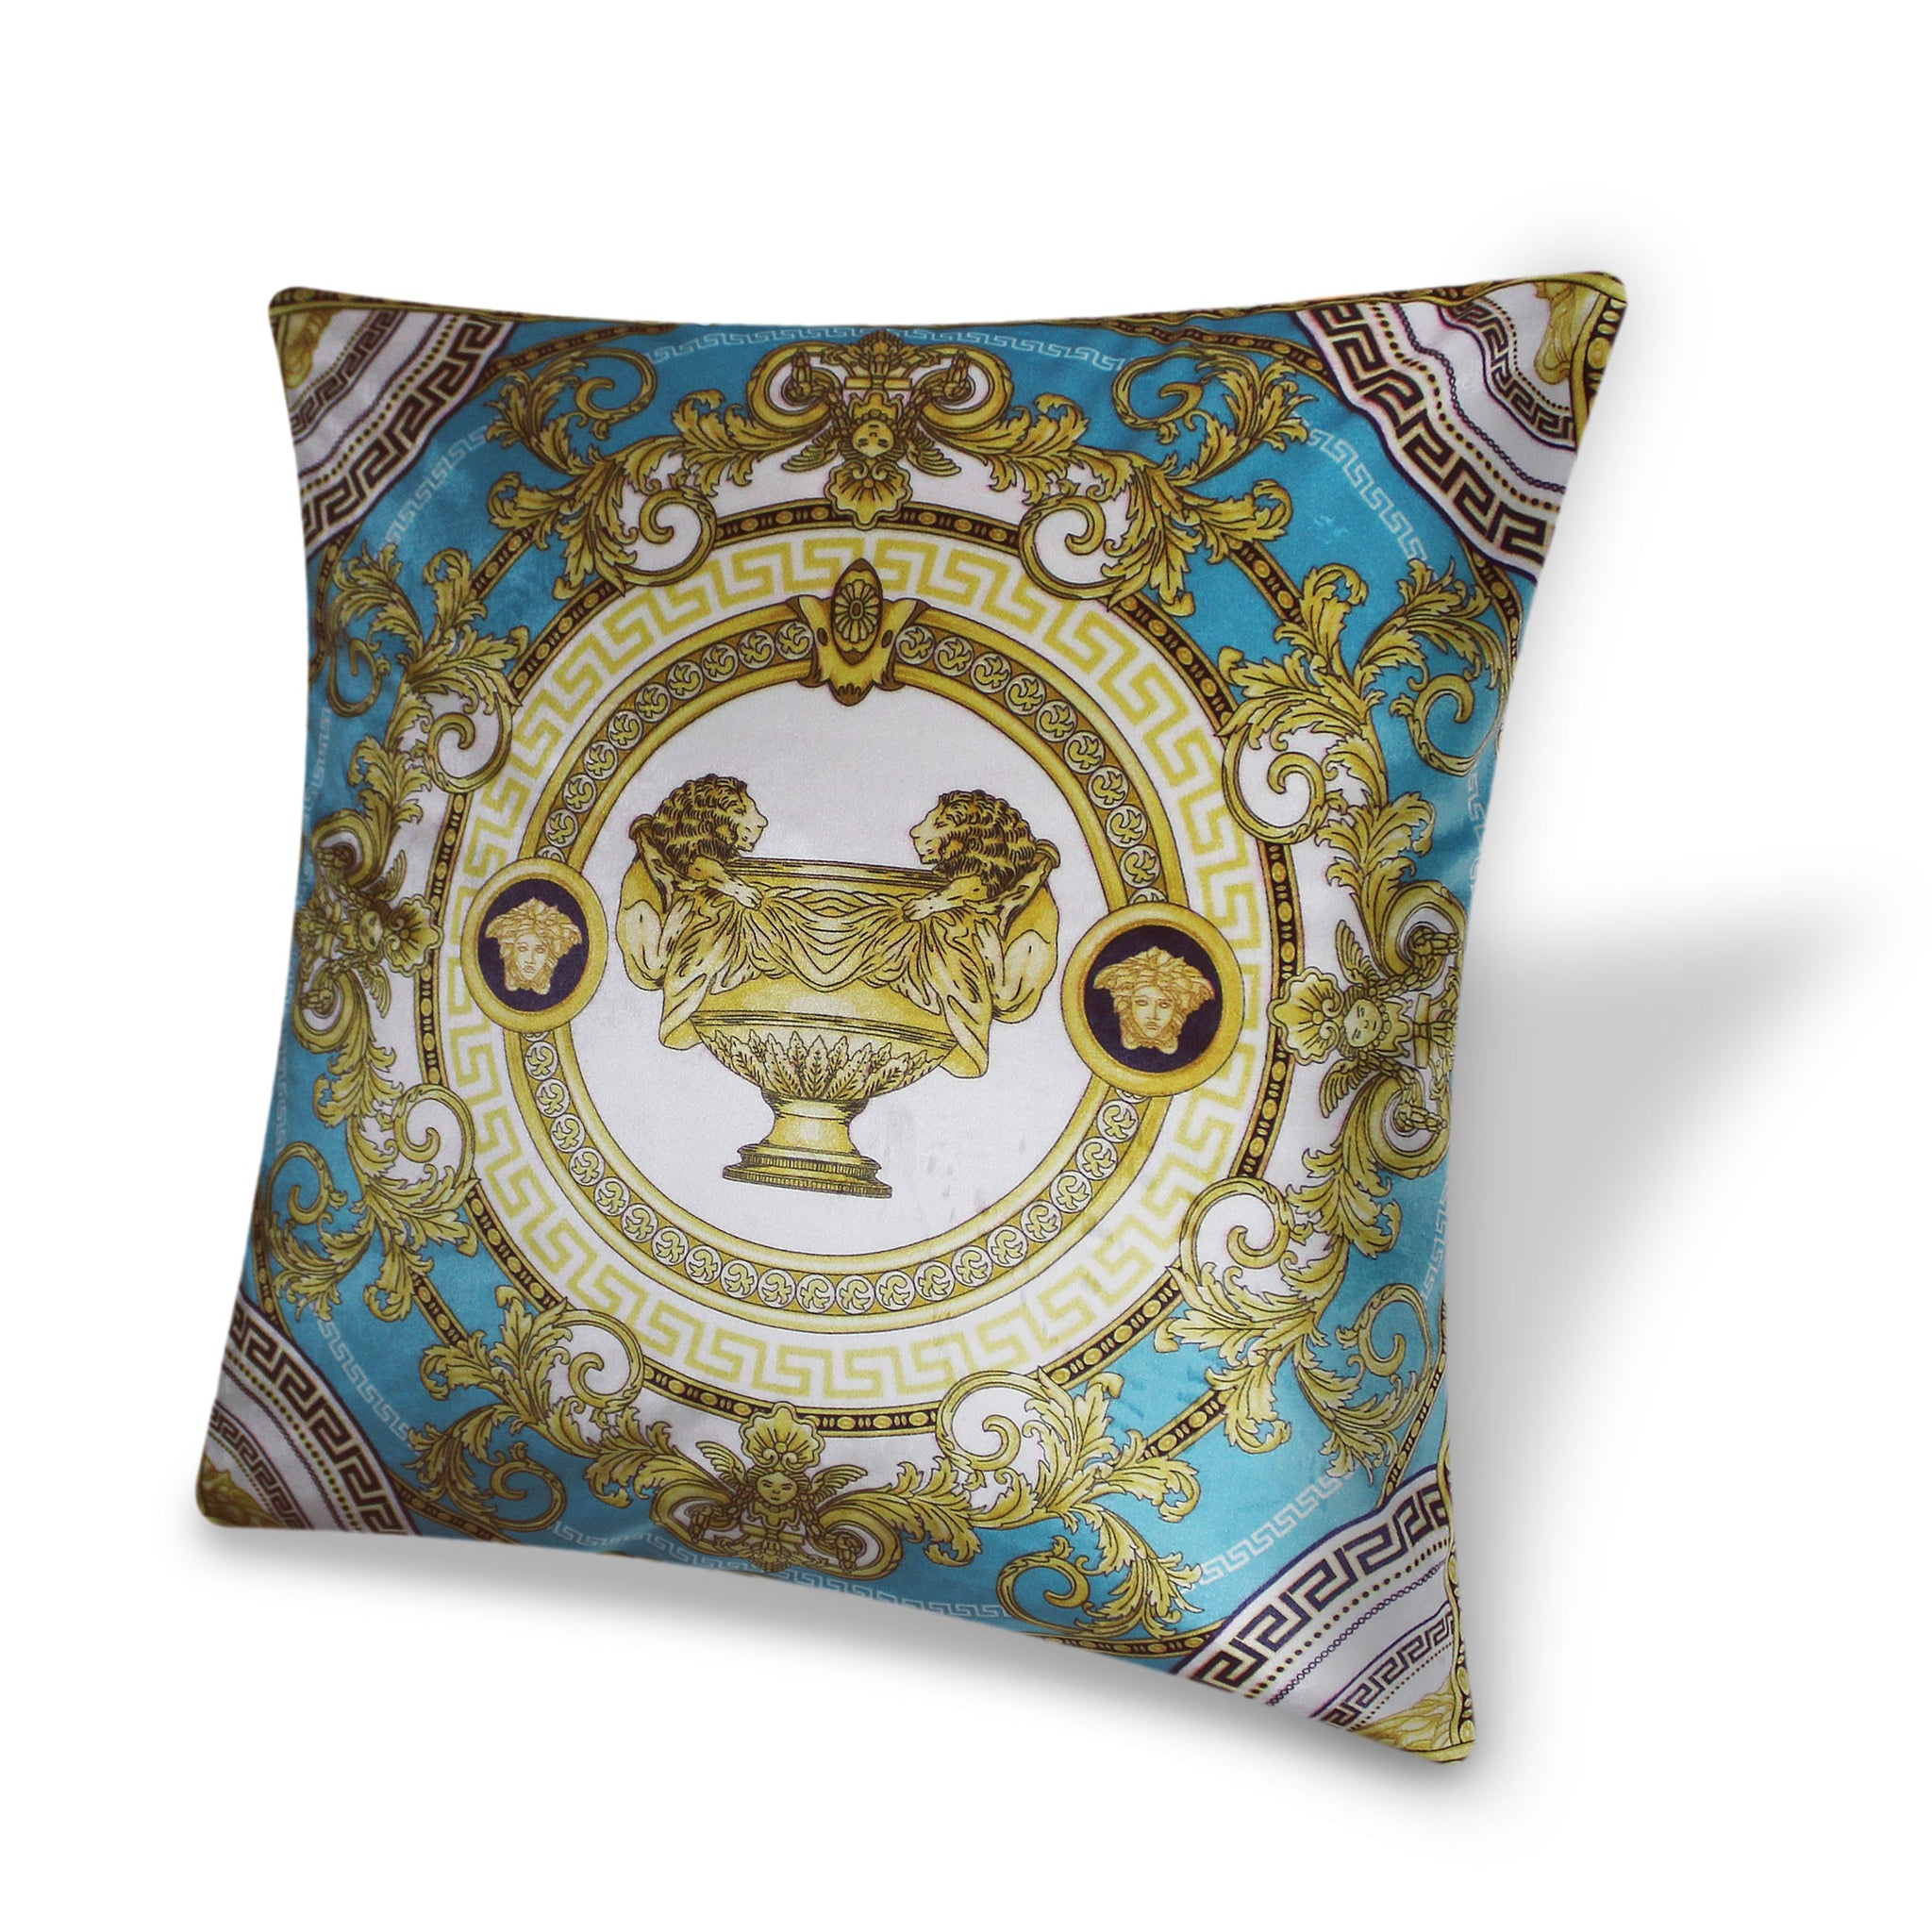 Velvet Pillow Cover Classic Baroque Style Decorative Traditional Floral Motif and Antique Greek Cup Throw Pillow for Sofa Chair 45x45cm 18x18 Inches